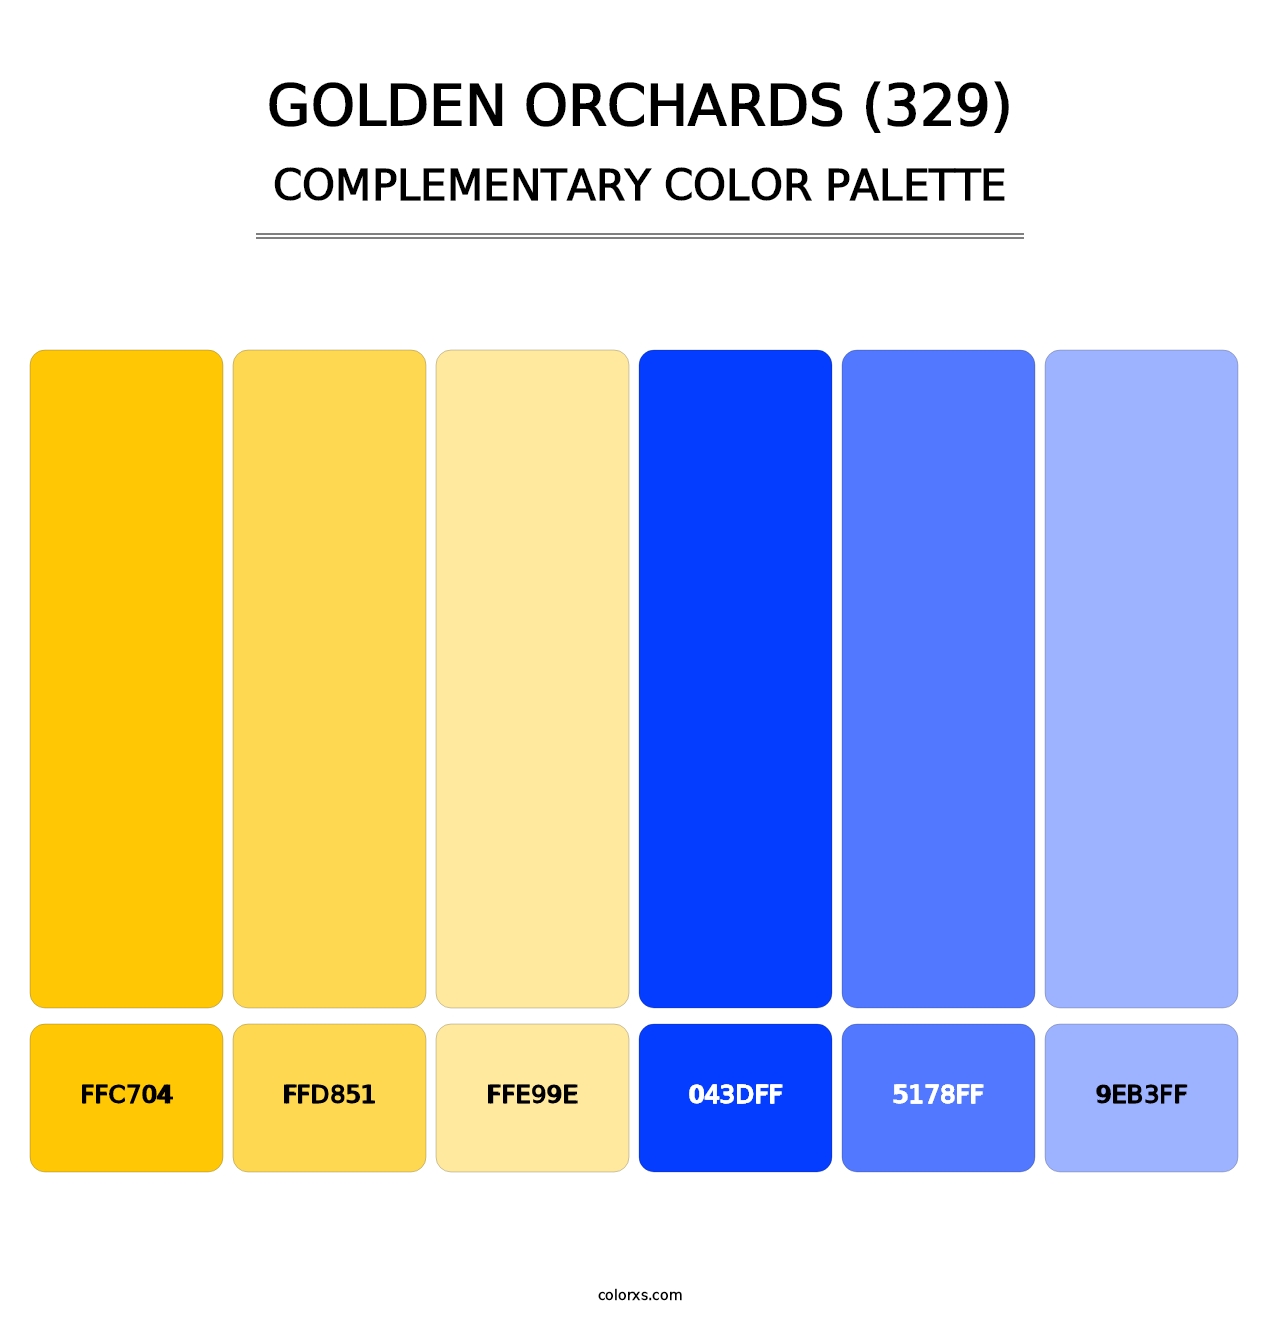 Golden Orchards (329) - Complementary Color Palette